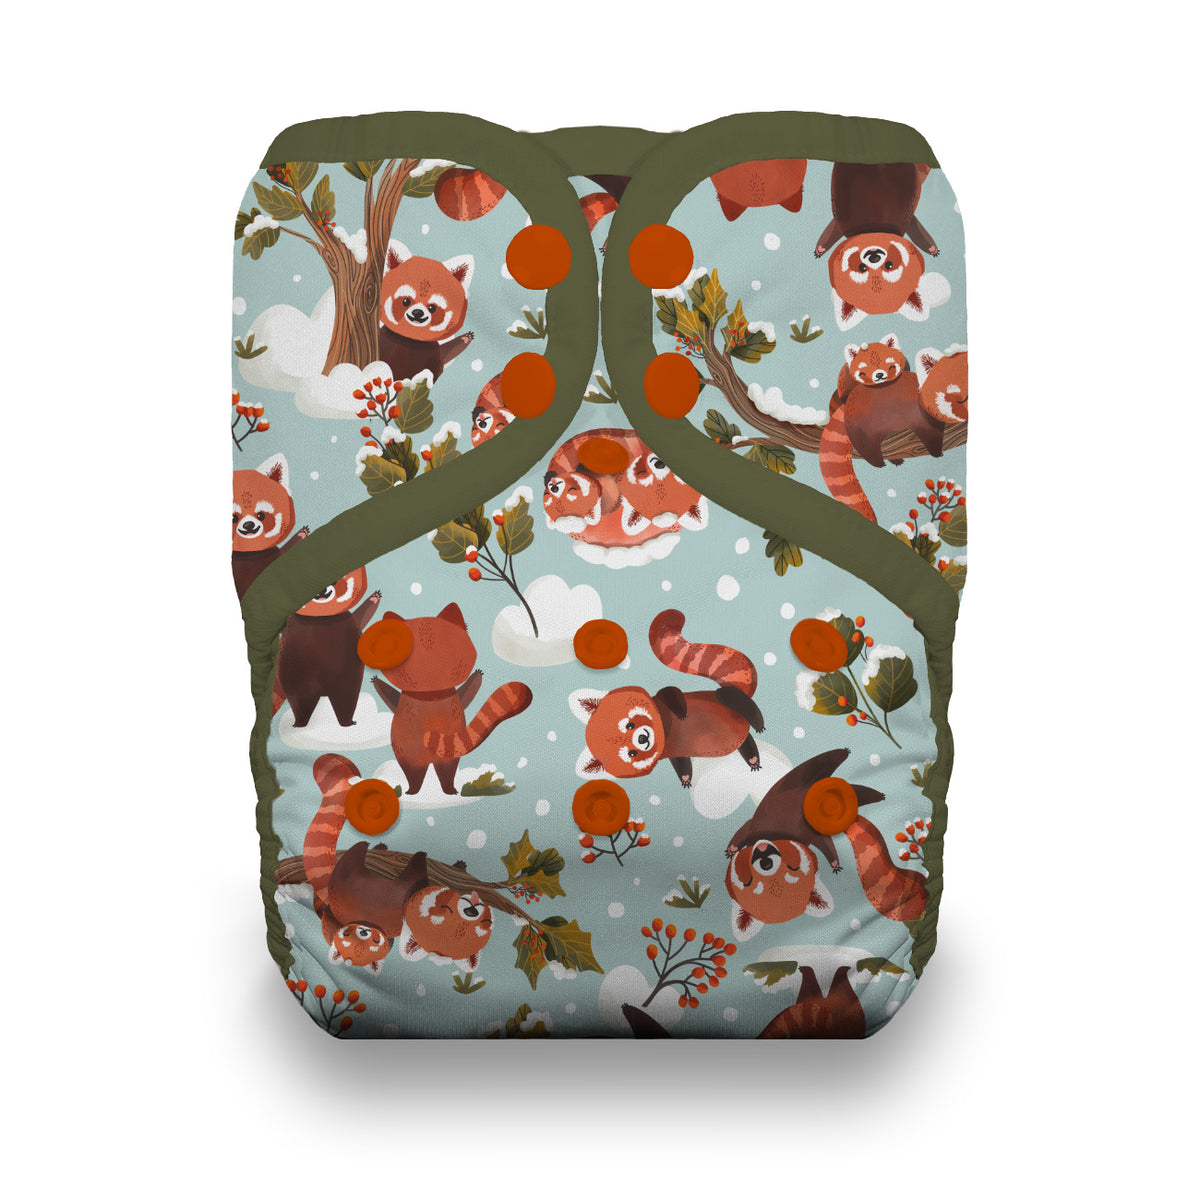 Thirsties Limited Edition Release - Red Panda - FINAL SALE